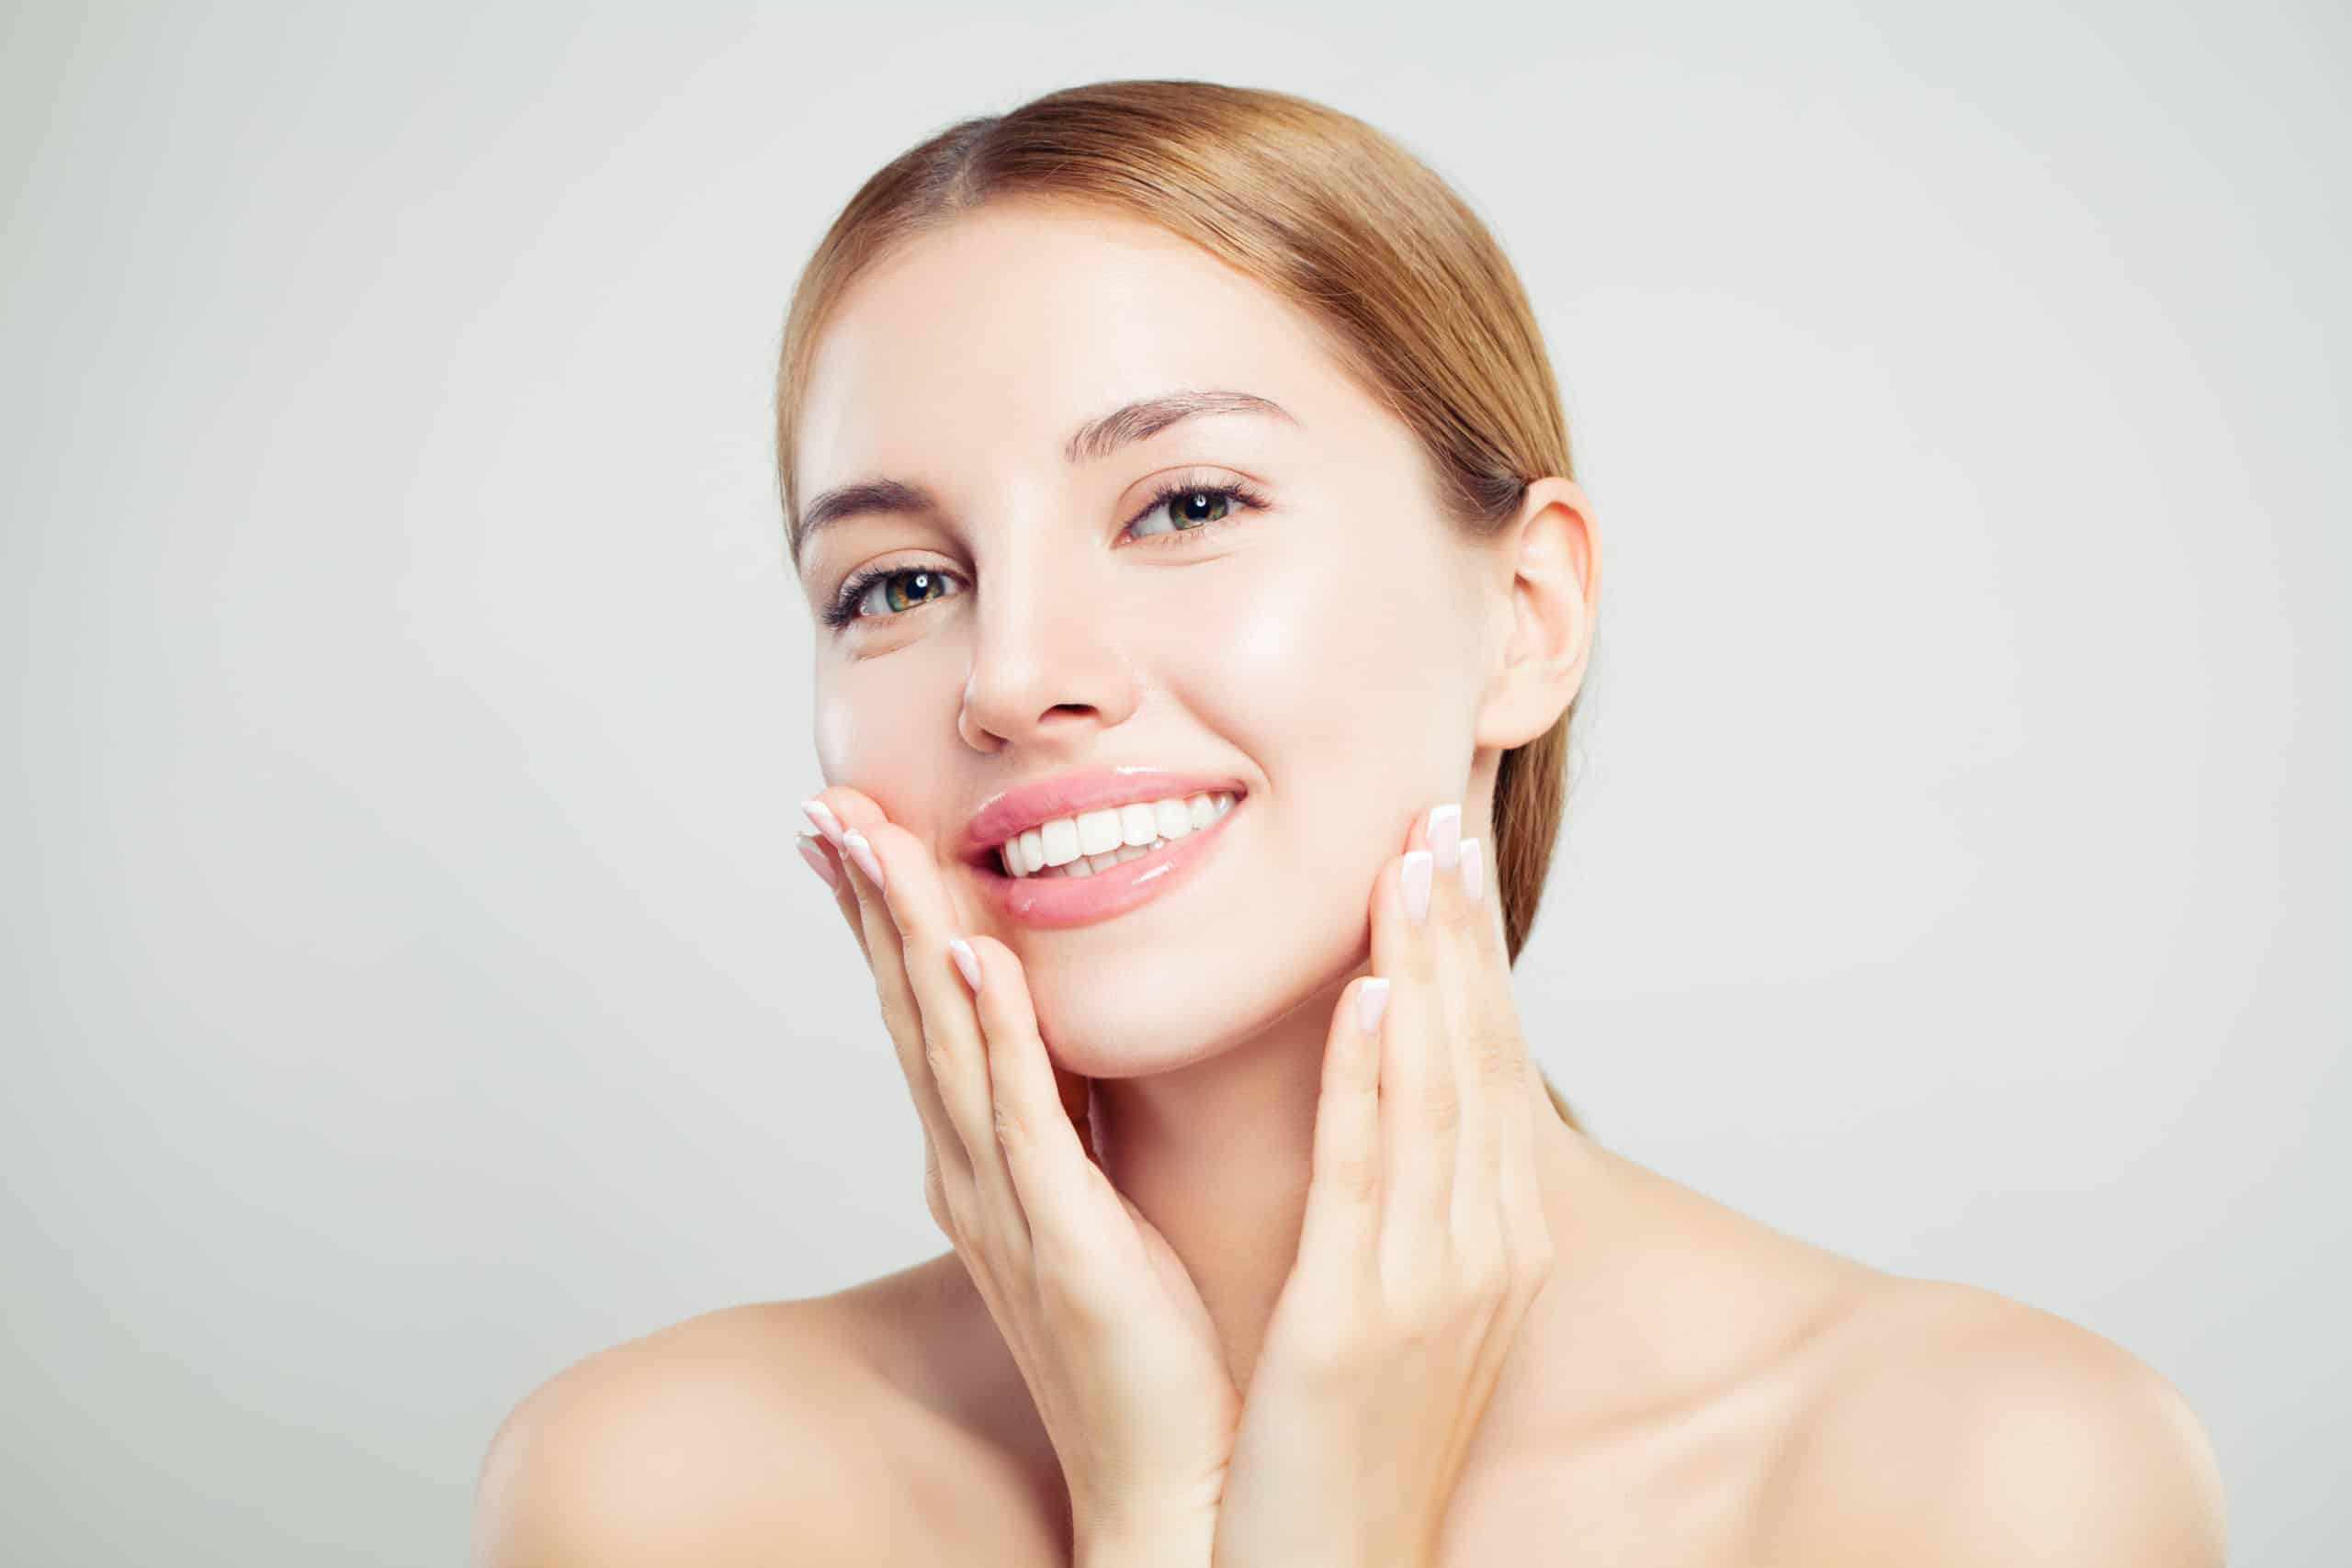 Is There Such Thing As Minimally Invasive Facial Plastic Surgery?